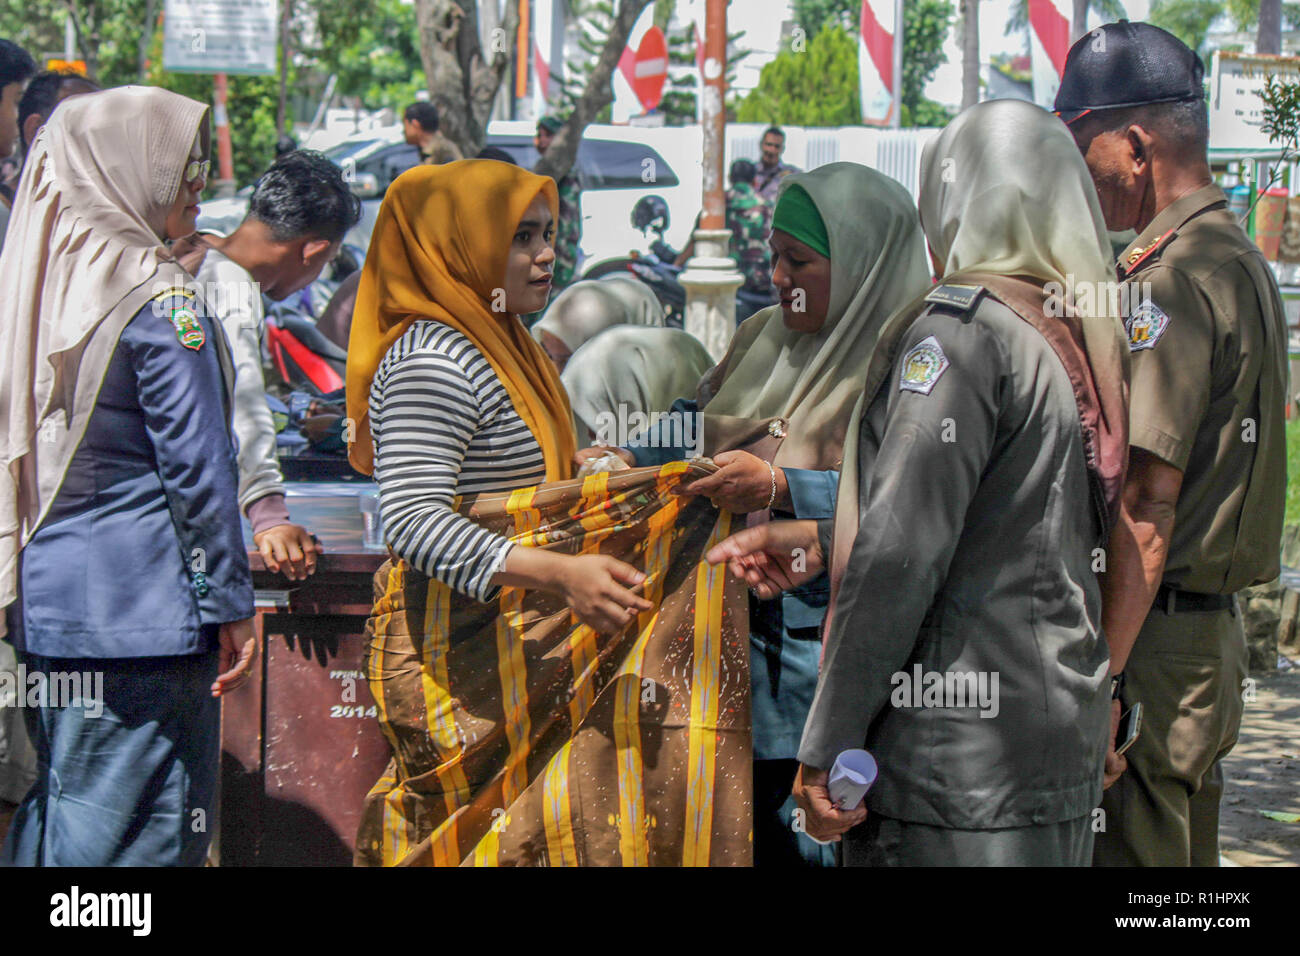 Islamic Sharia Police Officer (Wilayatul Hisbah) is seen tying a sarong to a woman who violated the Islamic Sharia law by force in the city of Lhokseumawe. Islamic Sharia Police Officers (Wilayatul Hisbah) provide sarongs for those who violated the Islamic Sharia law by force in the city of Lhokseumawe, Aceh is the only province in Indonesia that has the largest population of Muslims in the world, which implements the Islamic Sharia law such as committee caning and conducting routine raids for those who are tightly dressed for women and shorts for men. Stock Photo